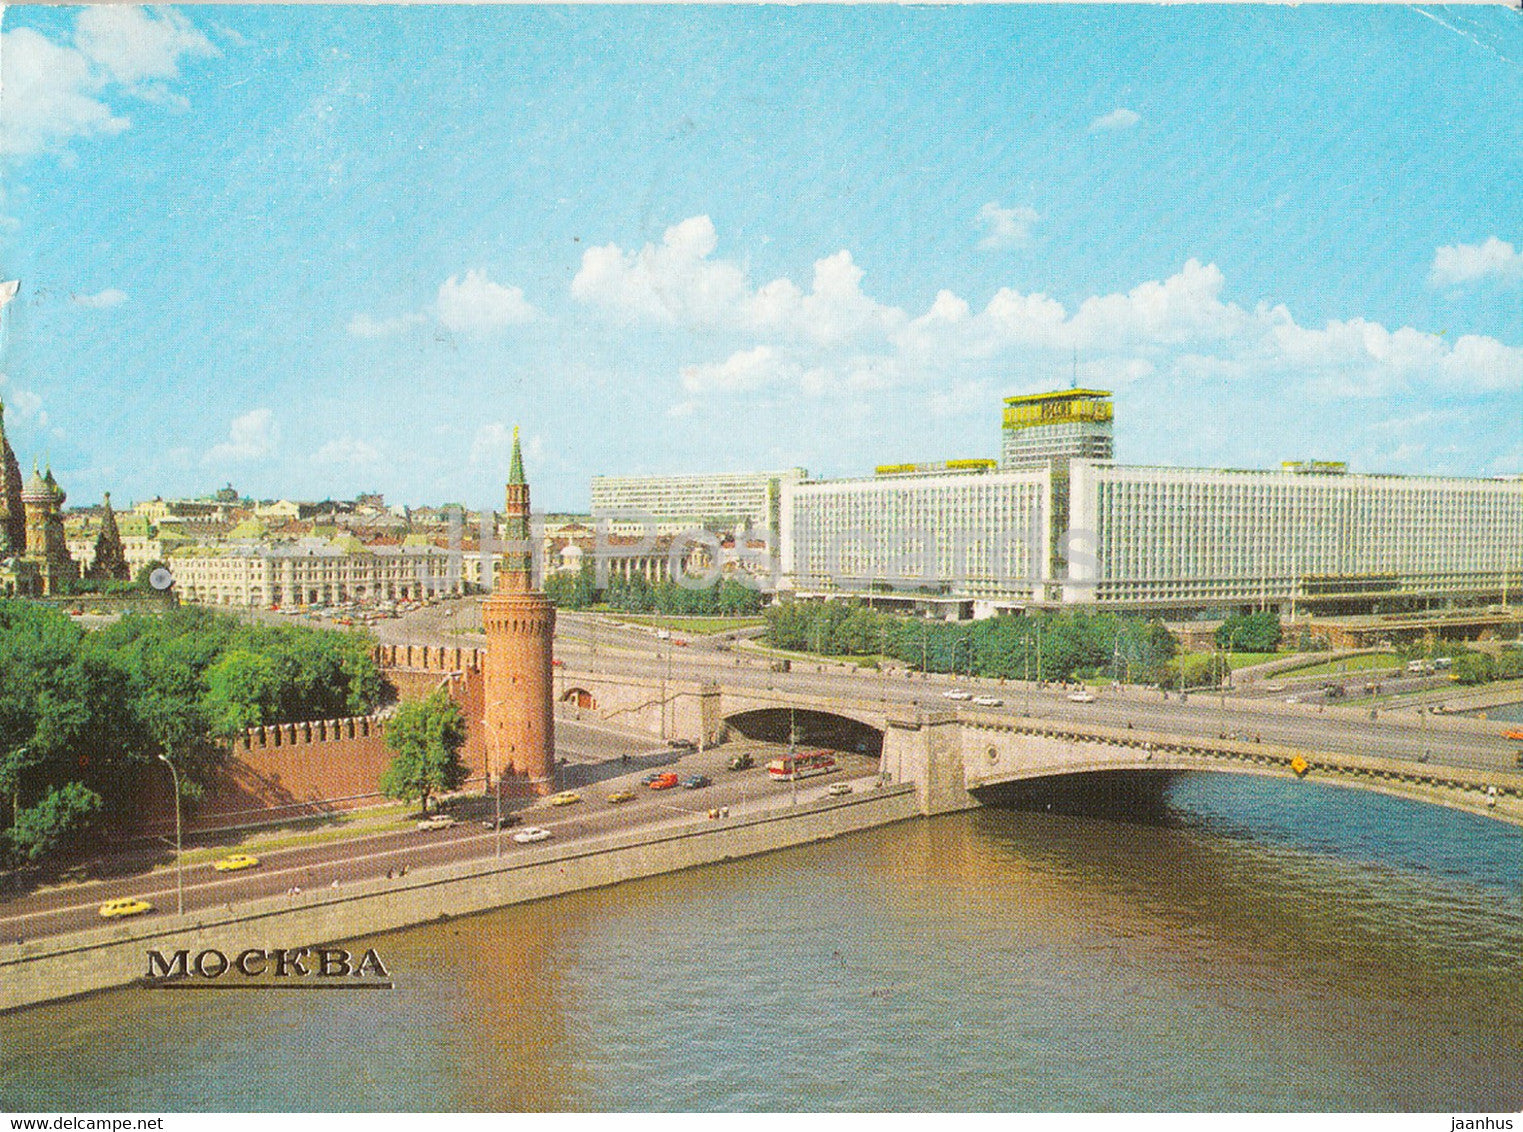 Moscow - hotel Rossia - bridge - 1980 - Russia USSR - used - JH Postcards